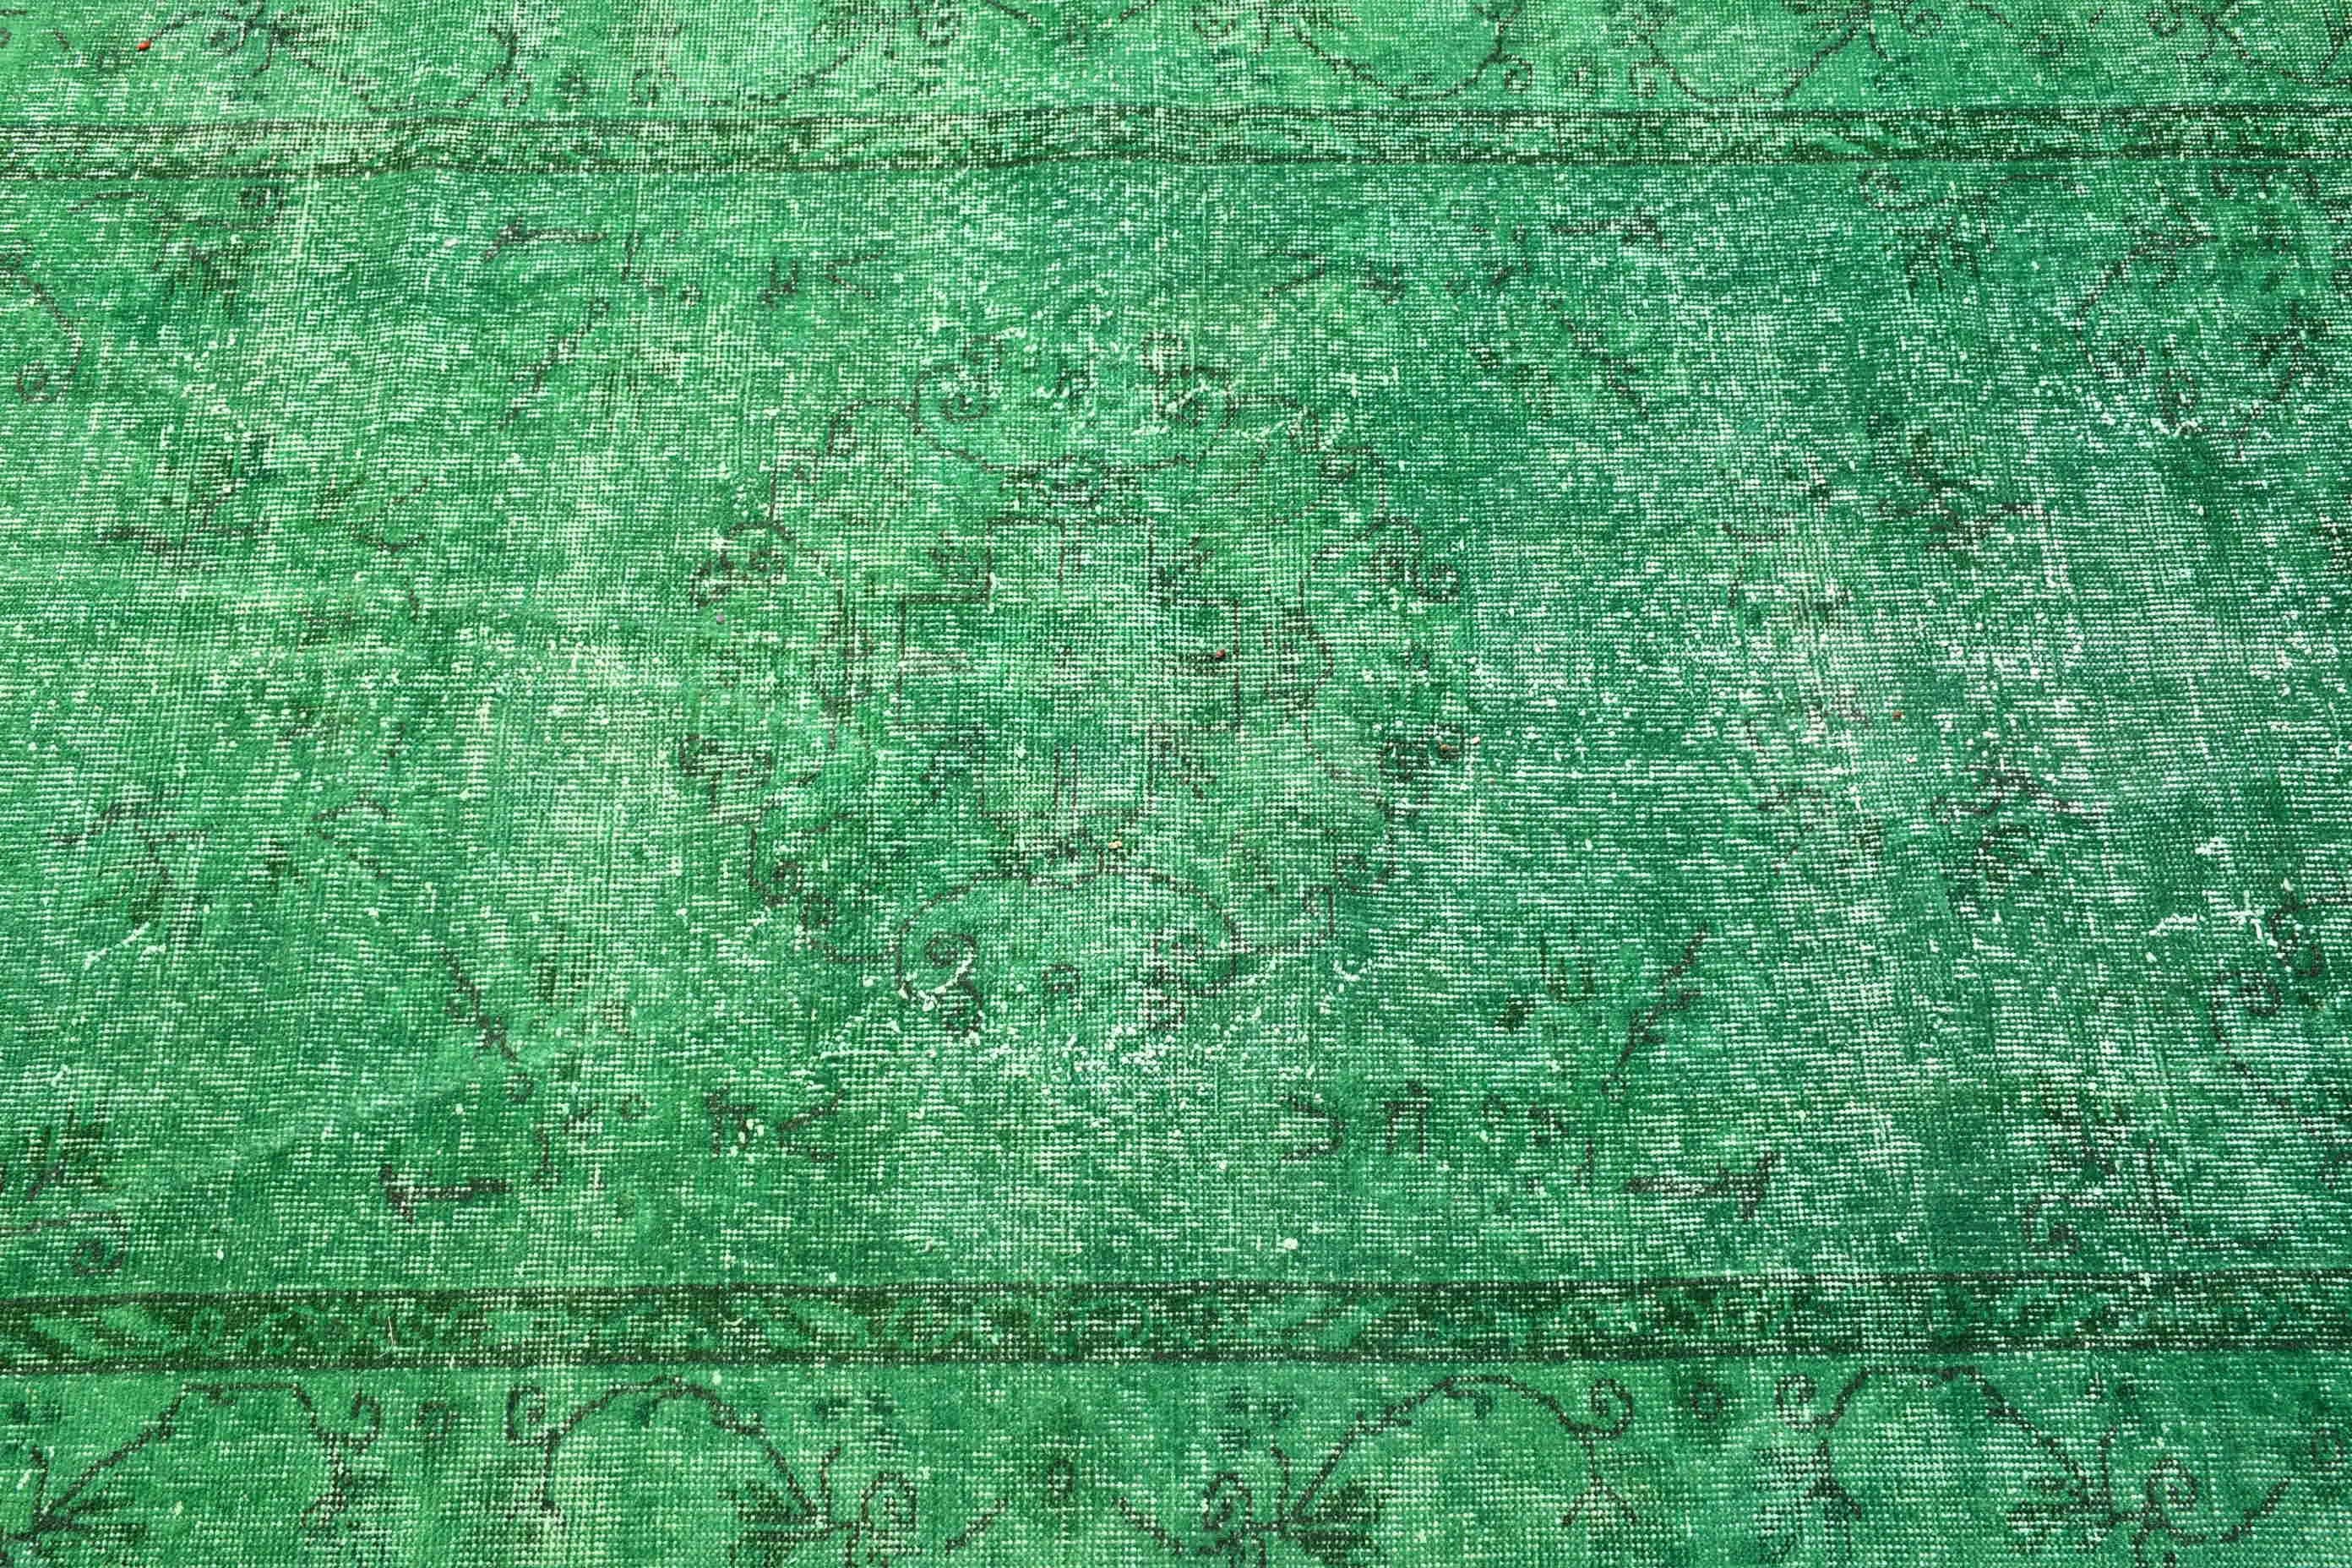 Home Decor Rugs, Turkish Rugs, Bedroom Rugs, Kitchen Rug, Bohemian Rugs, Moroccan Rug, Vintage Rug, 3.8x6.1 ft Accent Rugs, Green Wool Rug